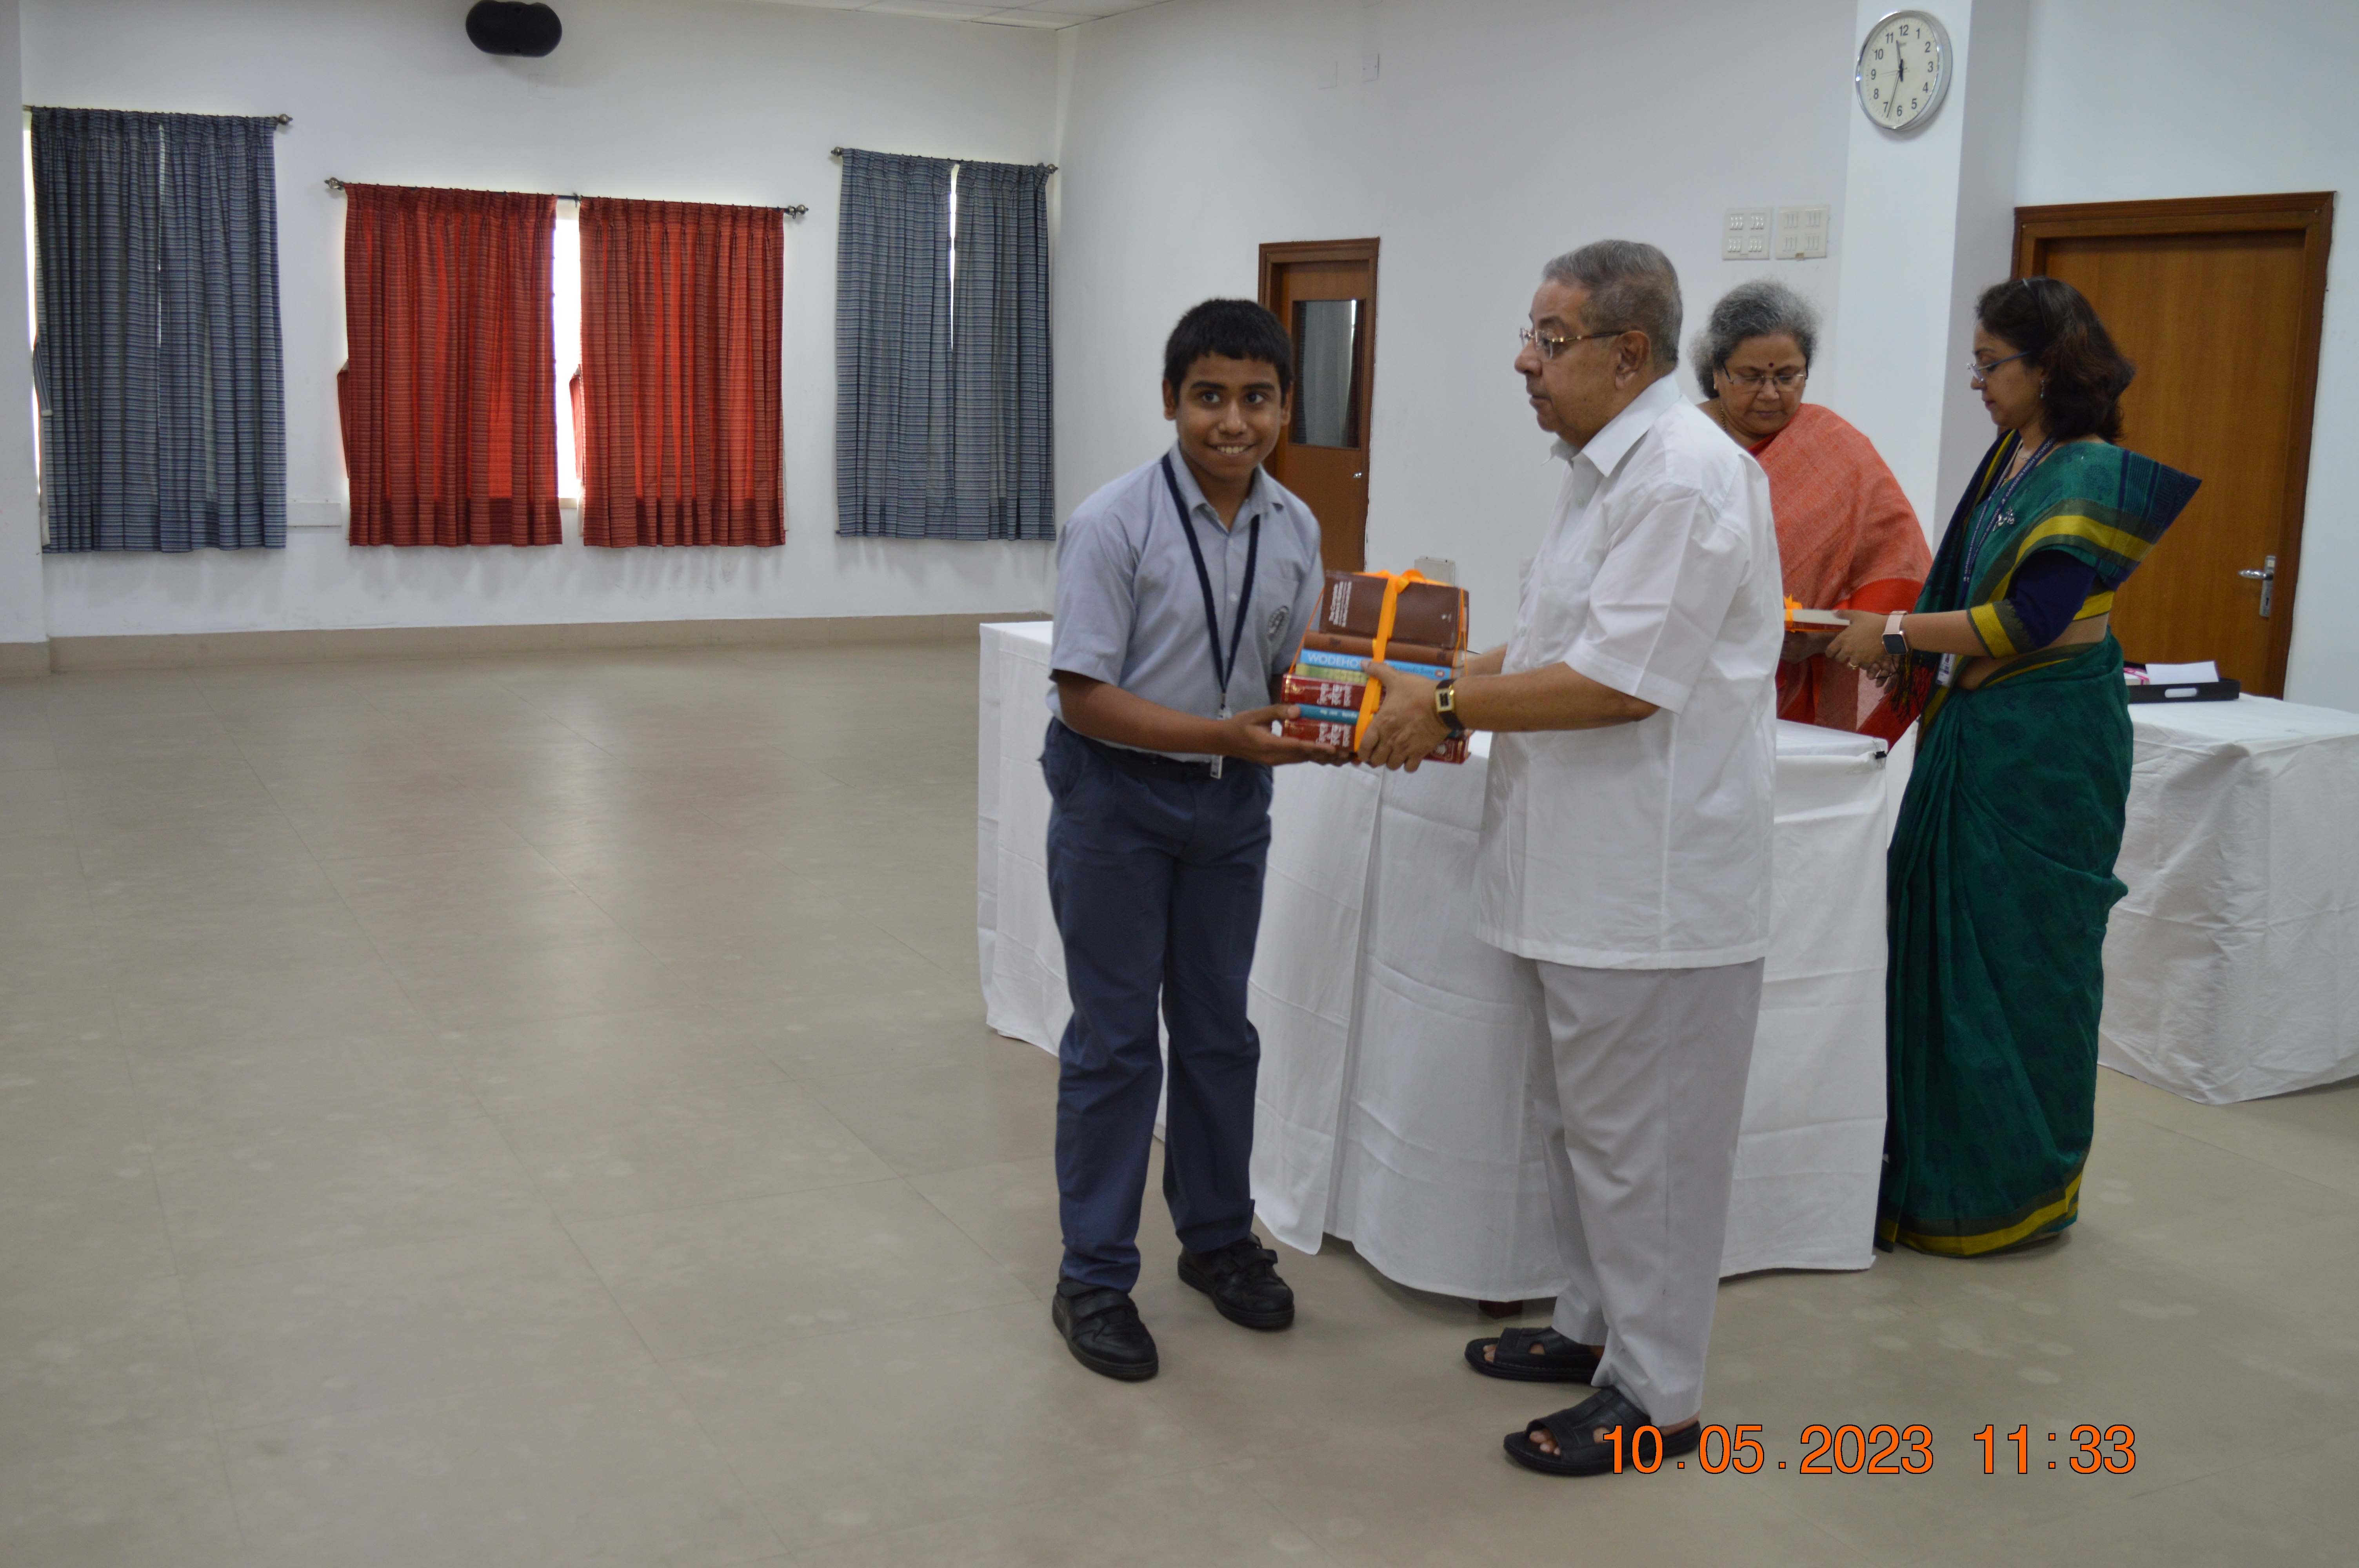 ANNUAL PRIZE DISTRIBUTION CEREMONY FOR THE ACADEMIC YEAR 2022-23 - CLASSES III TO VII 2